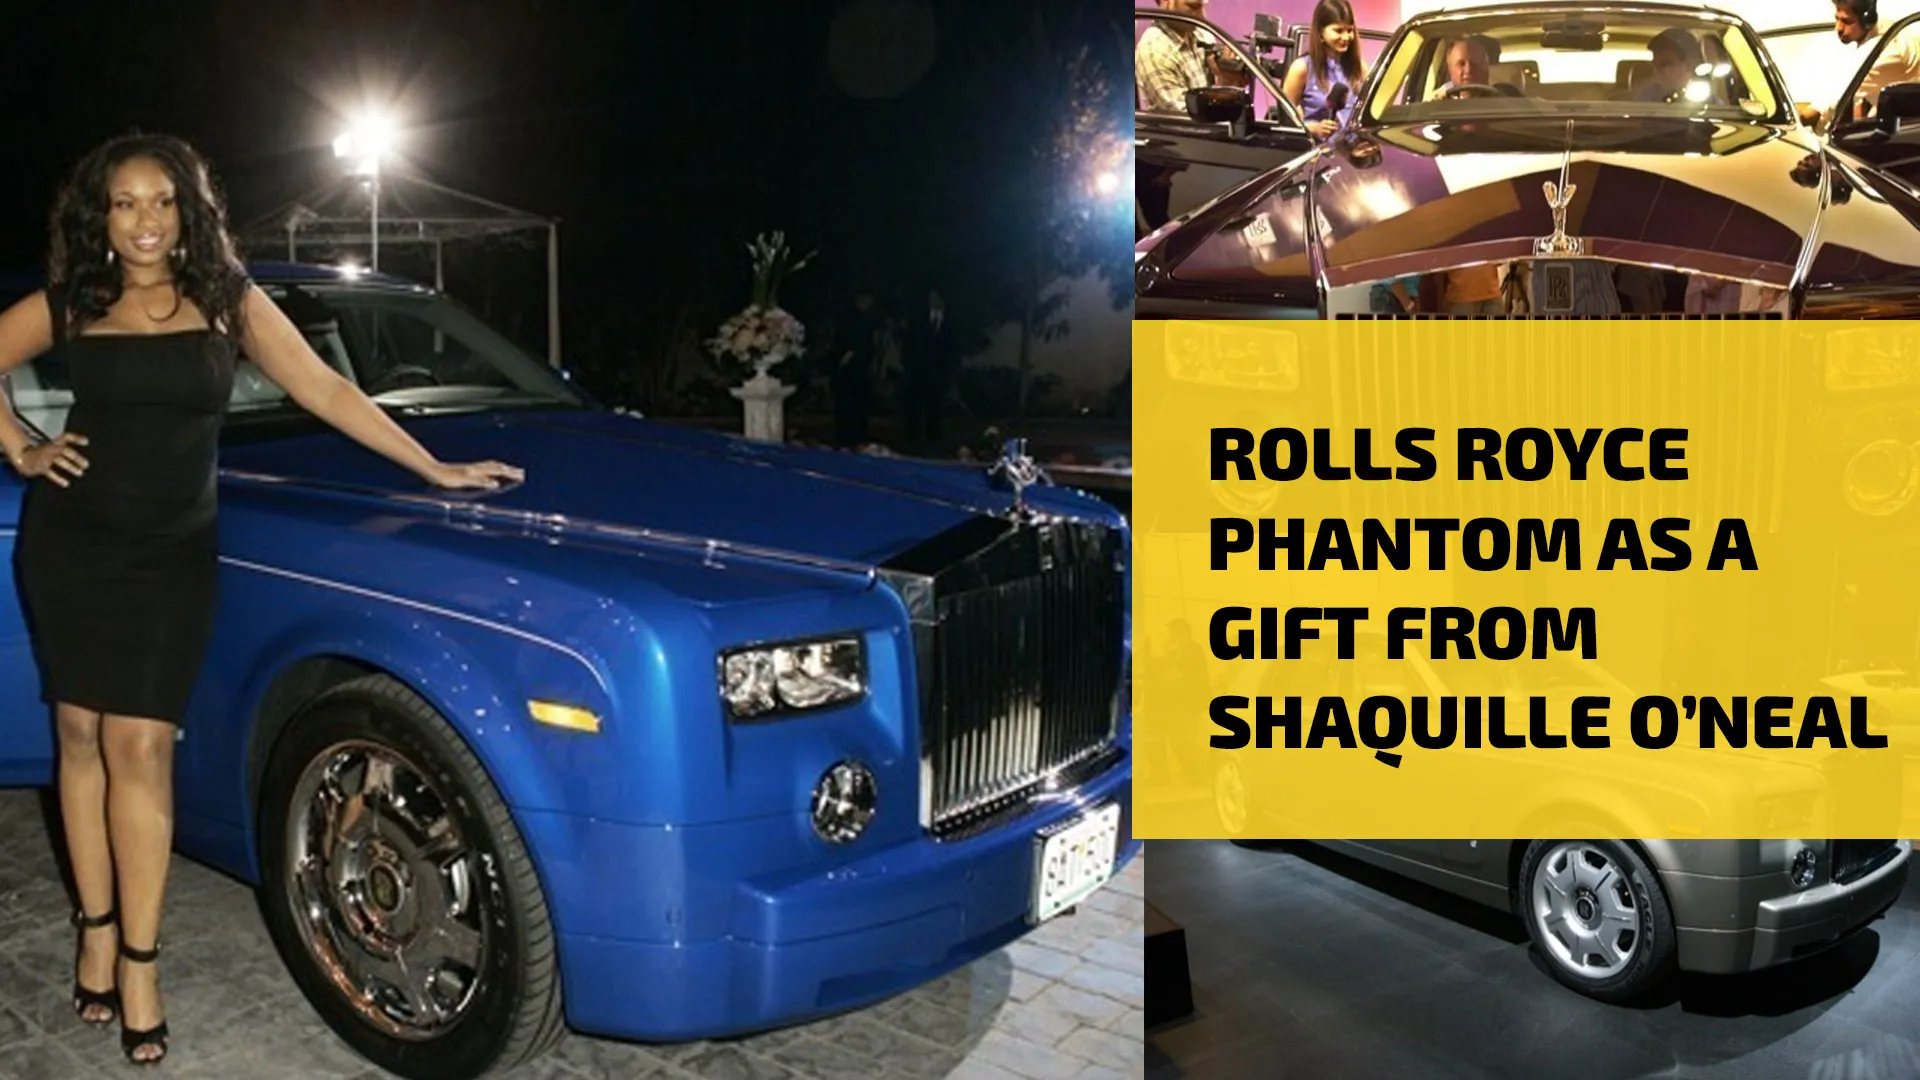 Rolls Royce Phantom as a Gift from Shaquille O’Neal